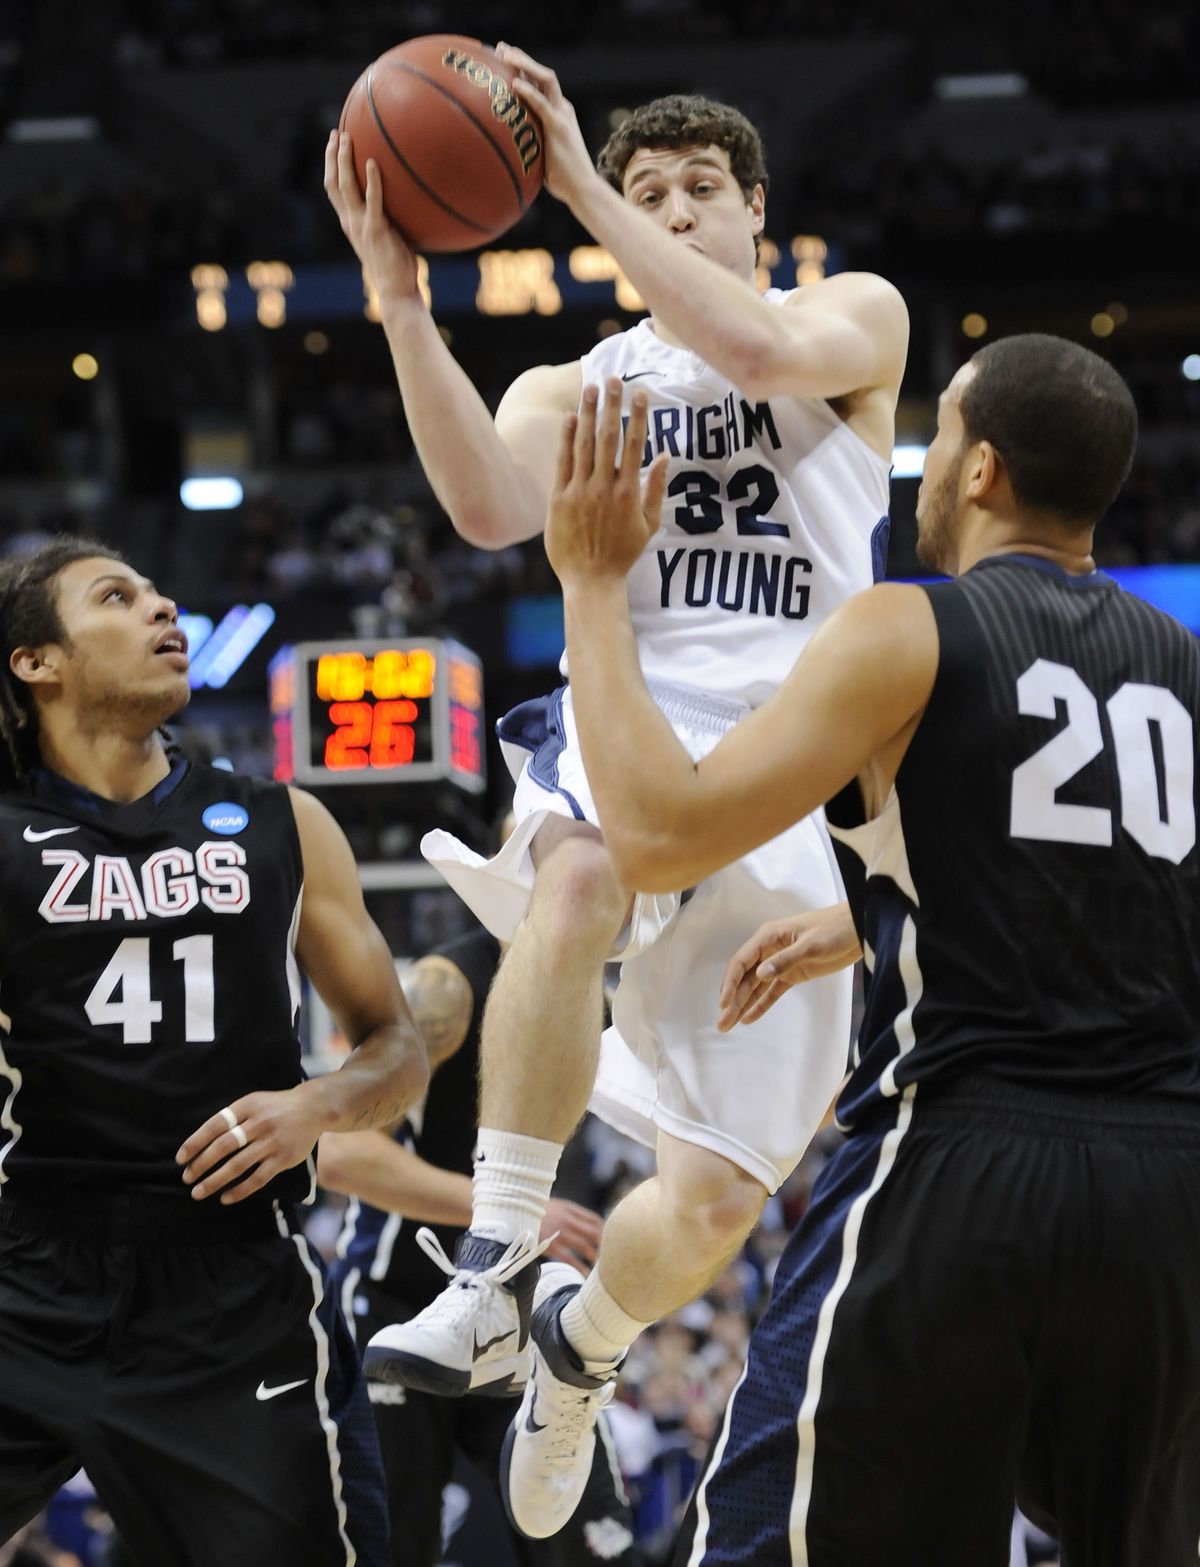 BYU guard Jimmer Fredette (32) goes up for a shot against Gonzaga guard Steven Gray (41) and Gonzaga forward Elias Harris (20) in the first half of a Southeast regional third round NCAA tournament college basketball game, Saturday, March 19, 2011, in Denver. (Jack Dempsey / Associated Press)